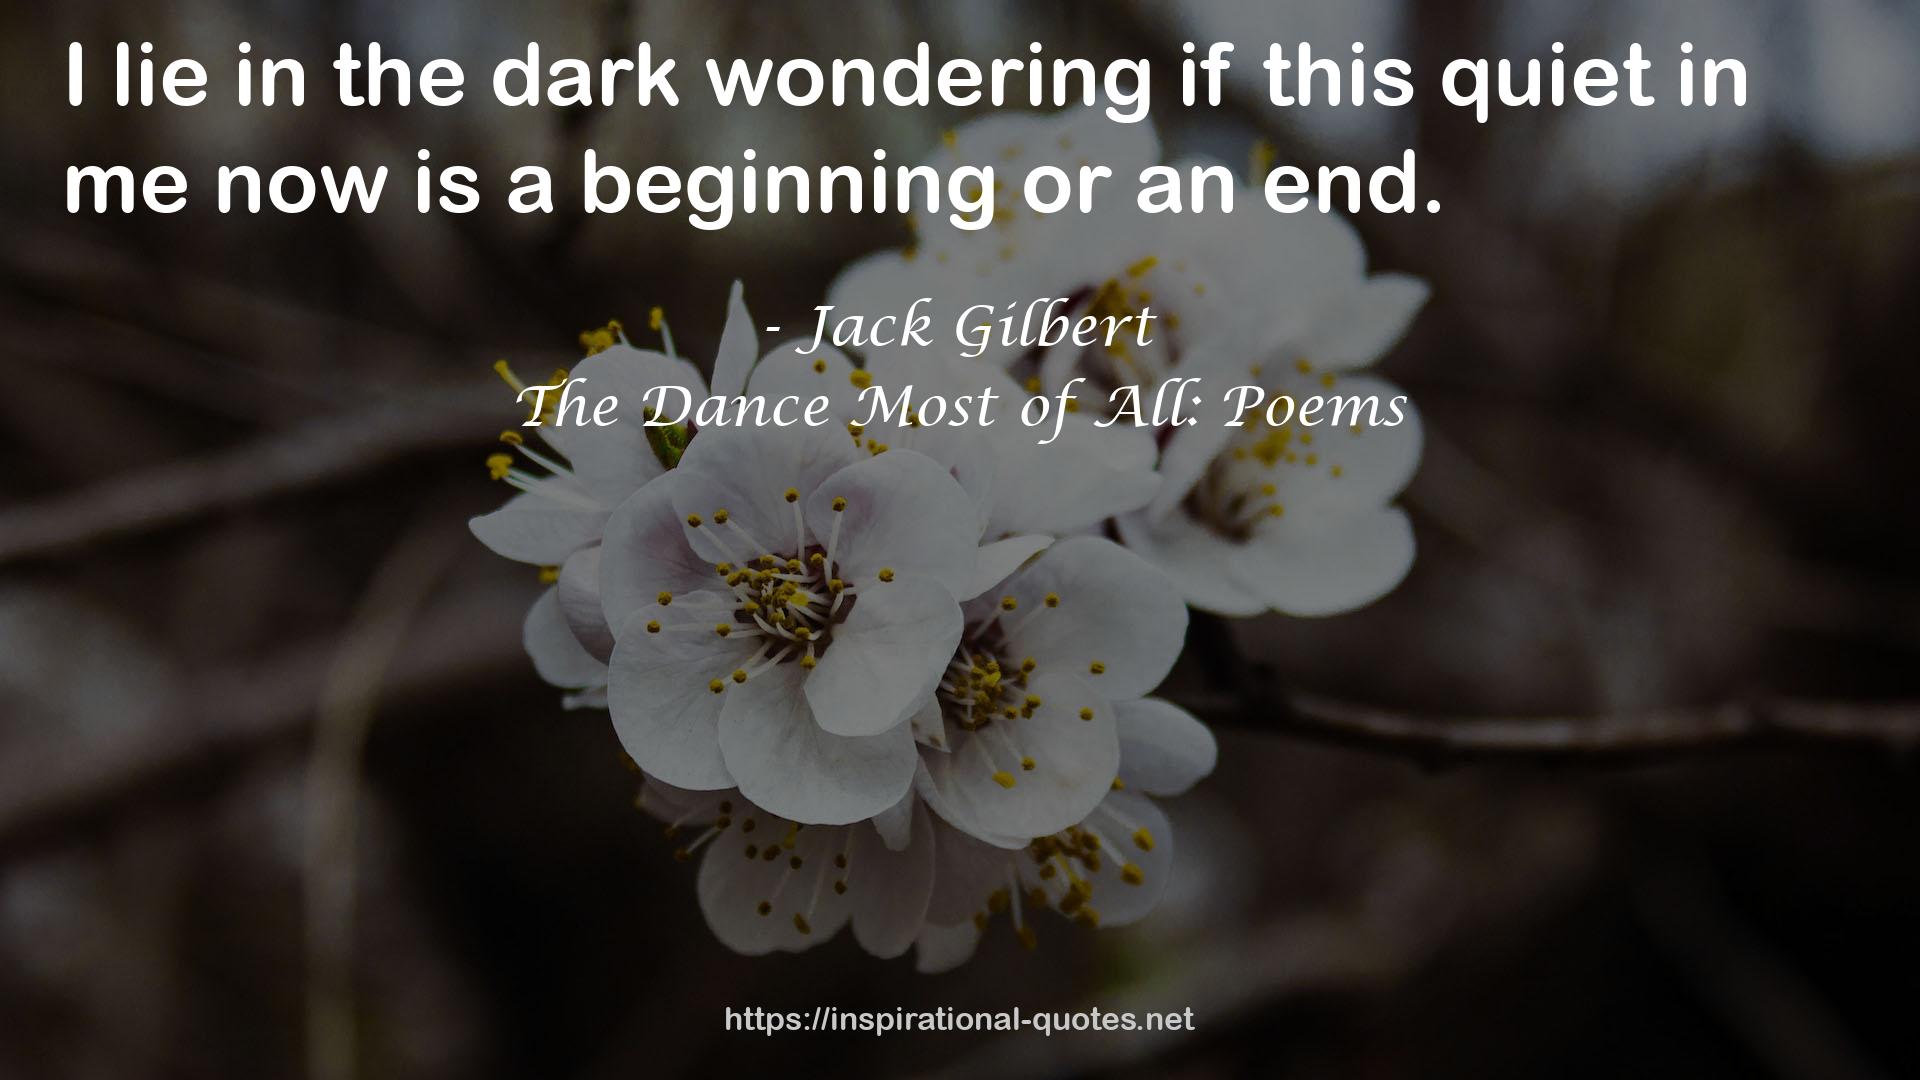 The Dance Most of All: Poems QUOTES